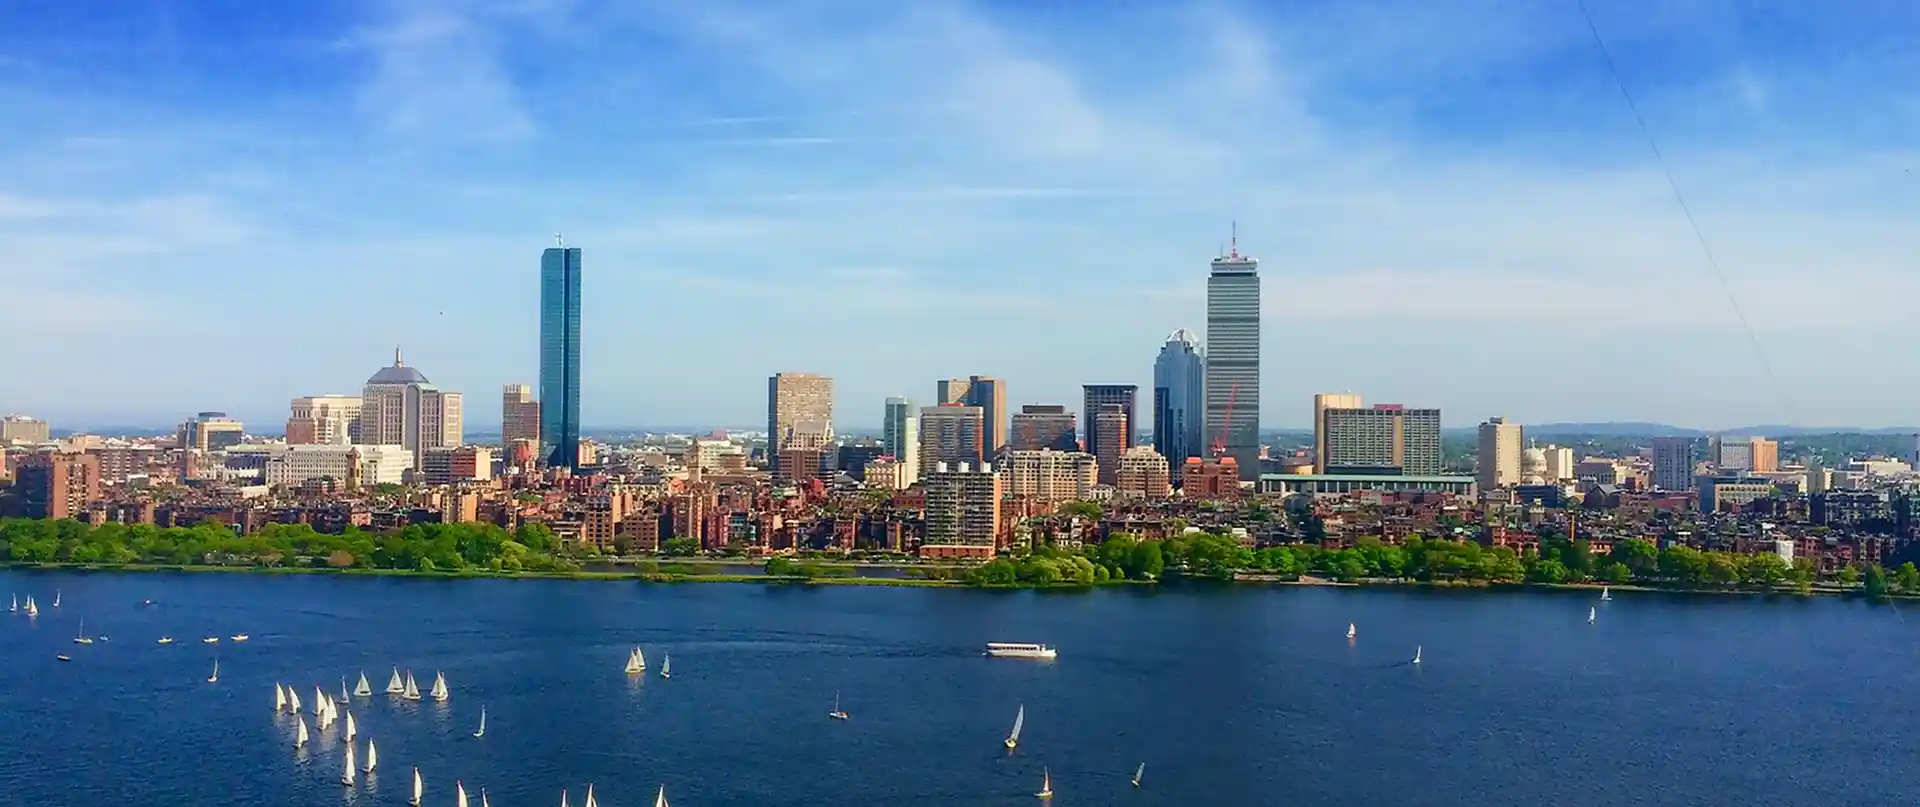 Top 5 most luxurious hotels in Boston